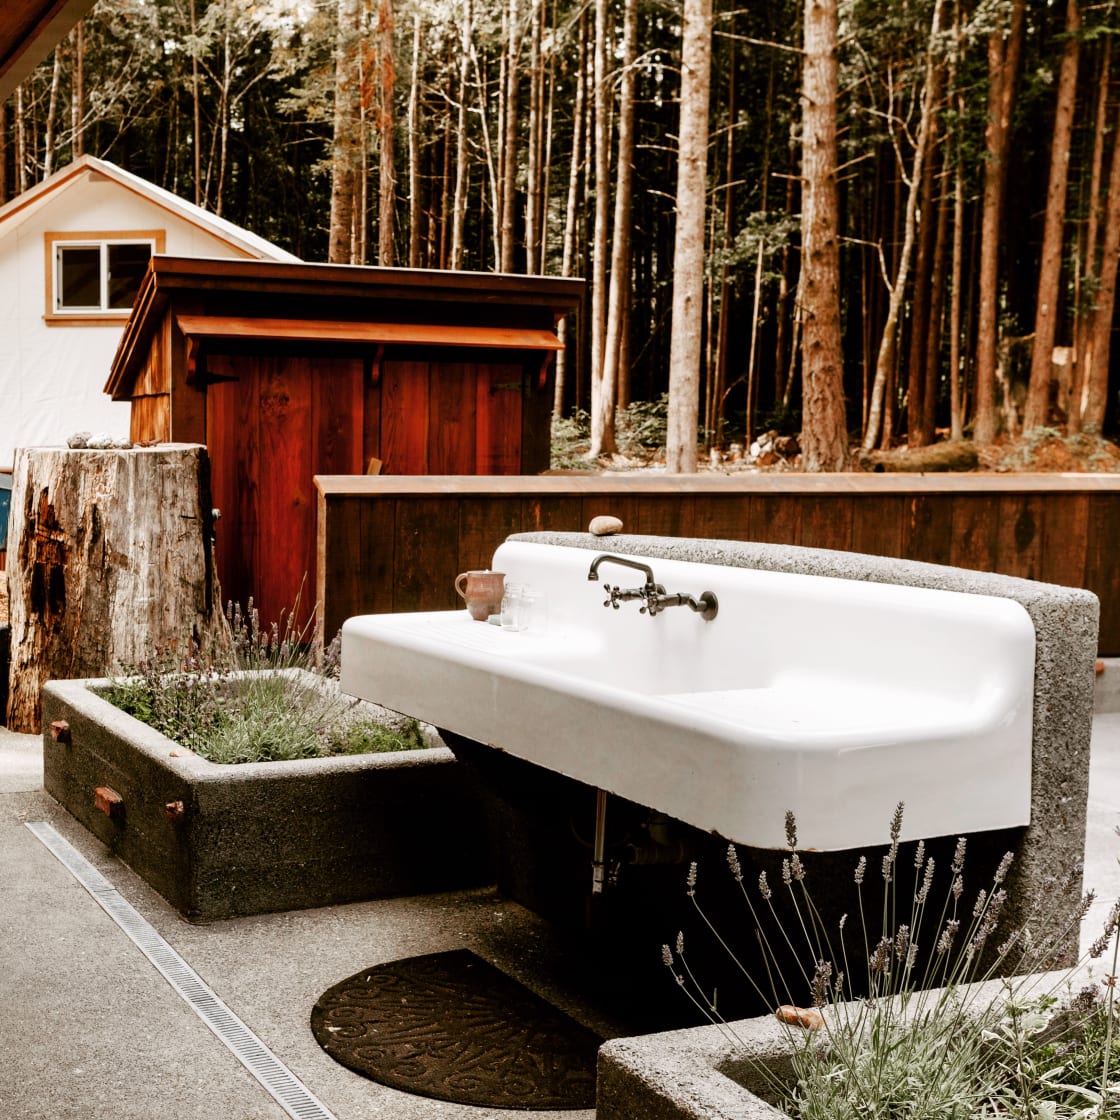 This sink near the bath house has hot and cold water and is framed with a lush herb garden. Pick what you need! 